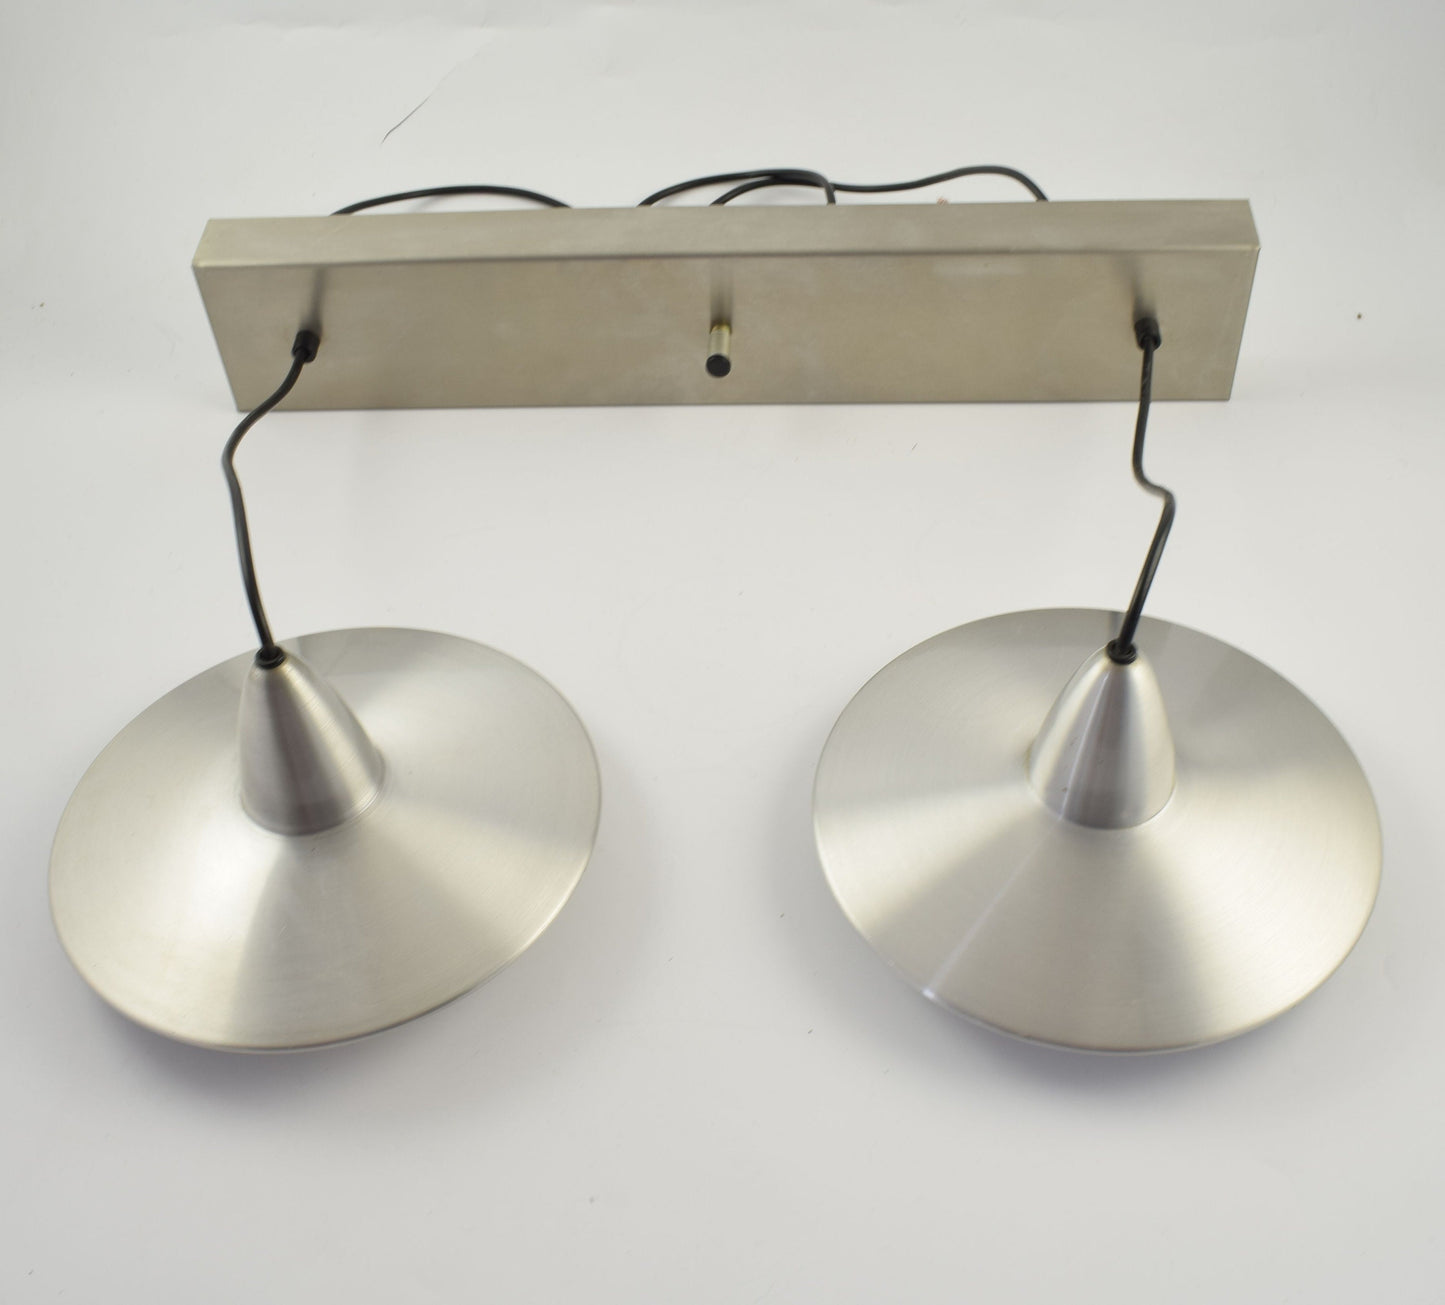 Two Aluminum hanging lamps, plus metal bar, in the shape of an ufo from dutch design company Hala.